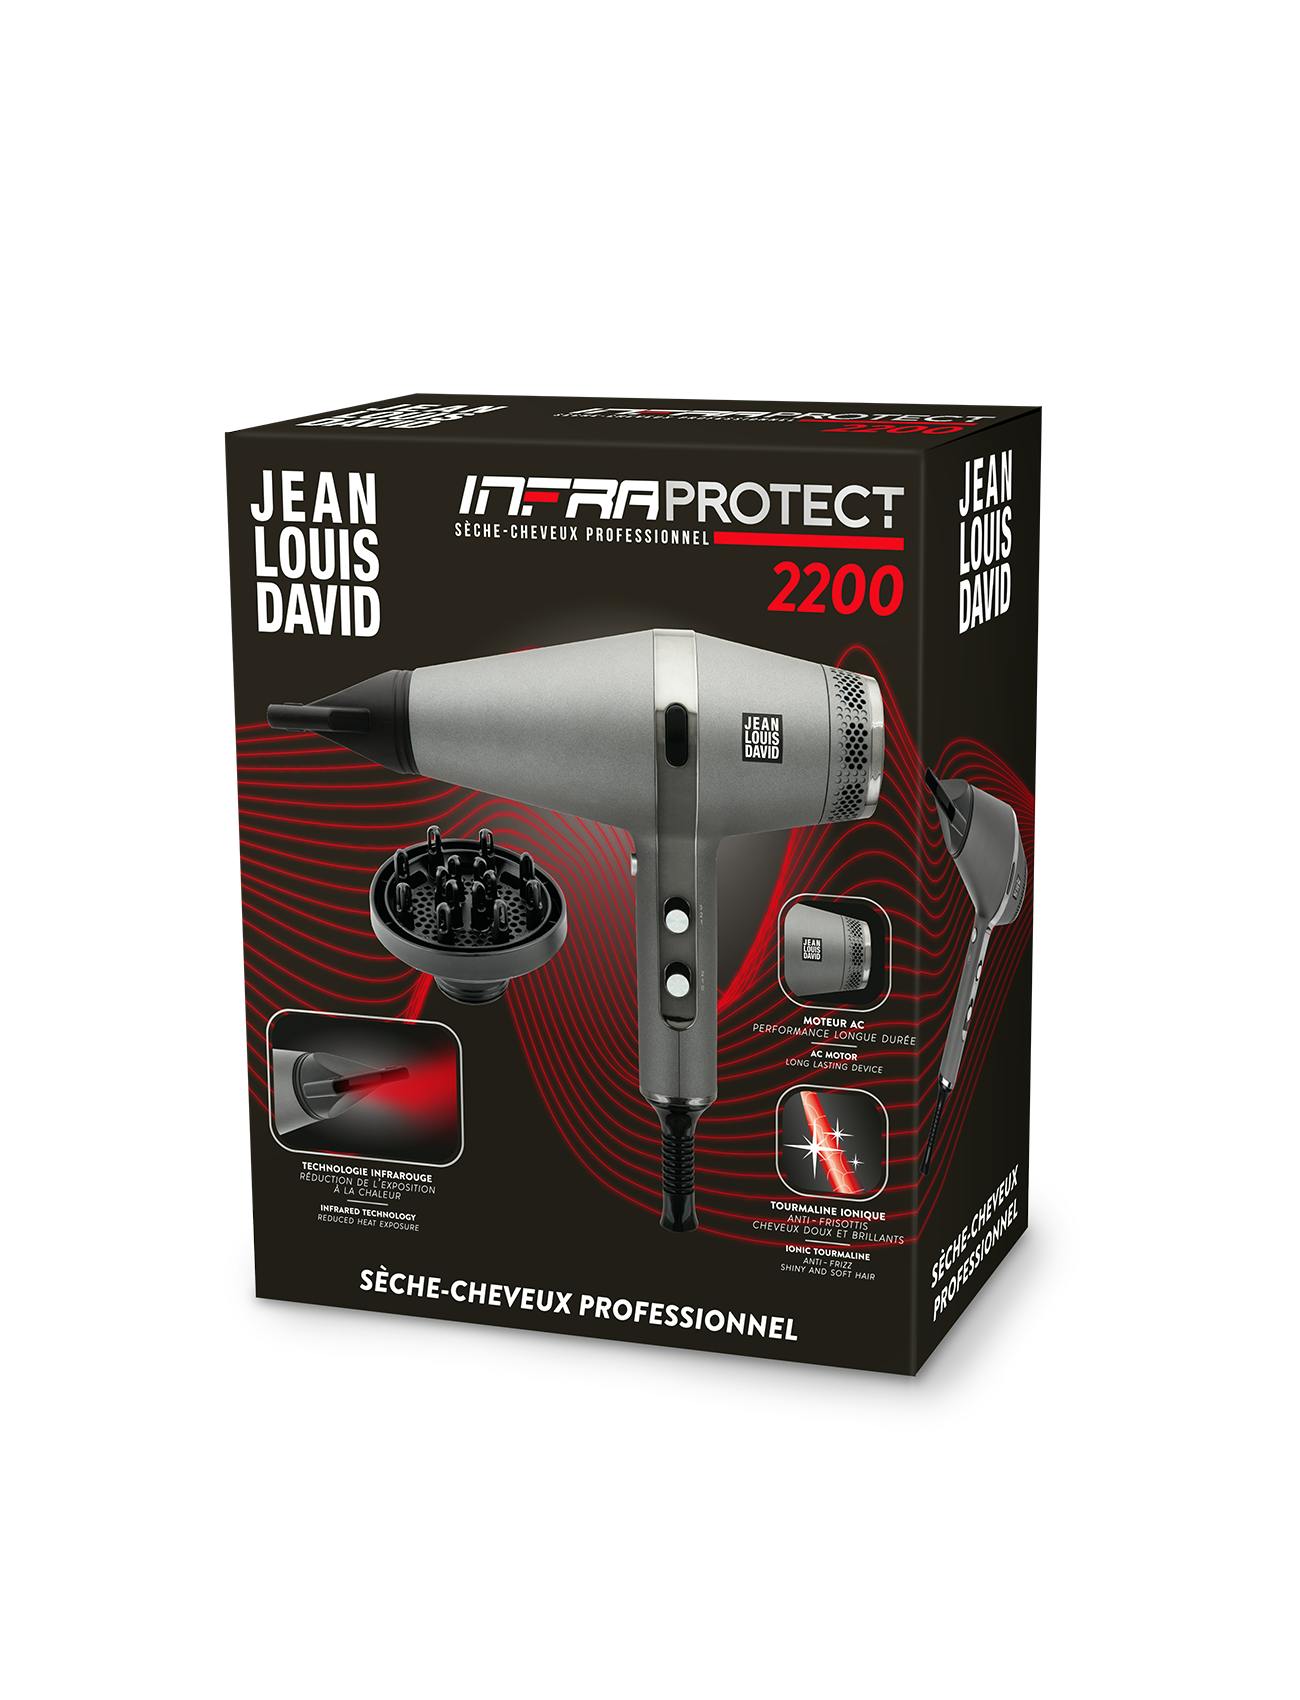 JLD - PROFESSIONAL HAIRDRYER